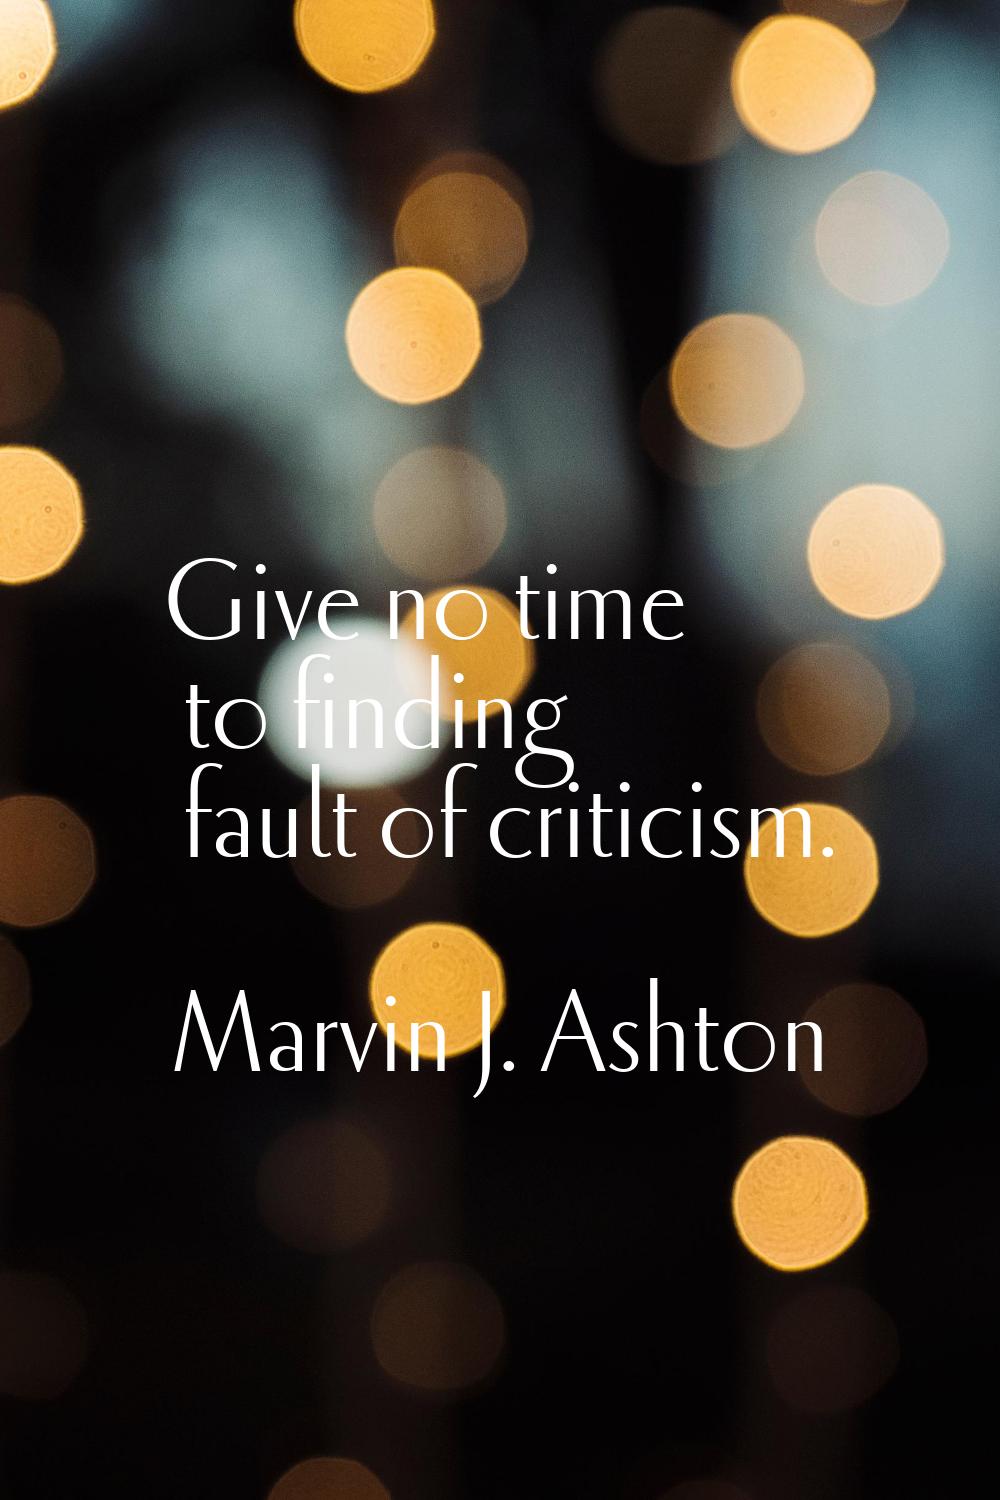 Give no time to finding fault of criticism.